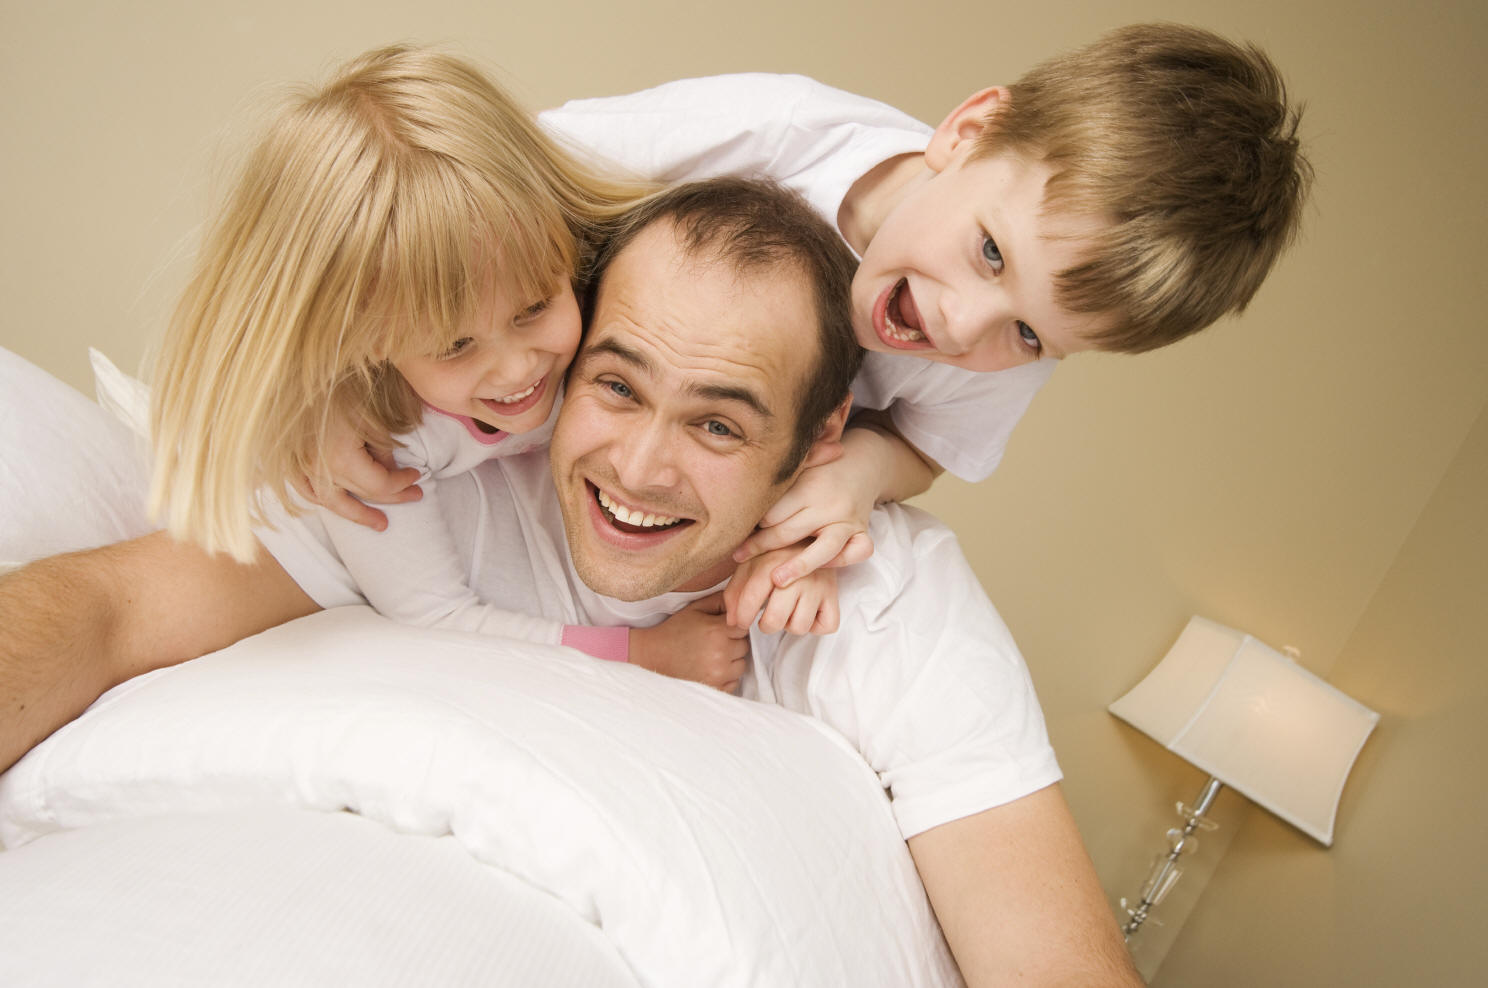 father-with-two-kids-playing.jpg